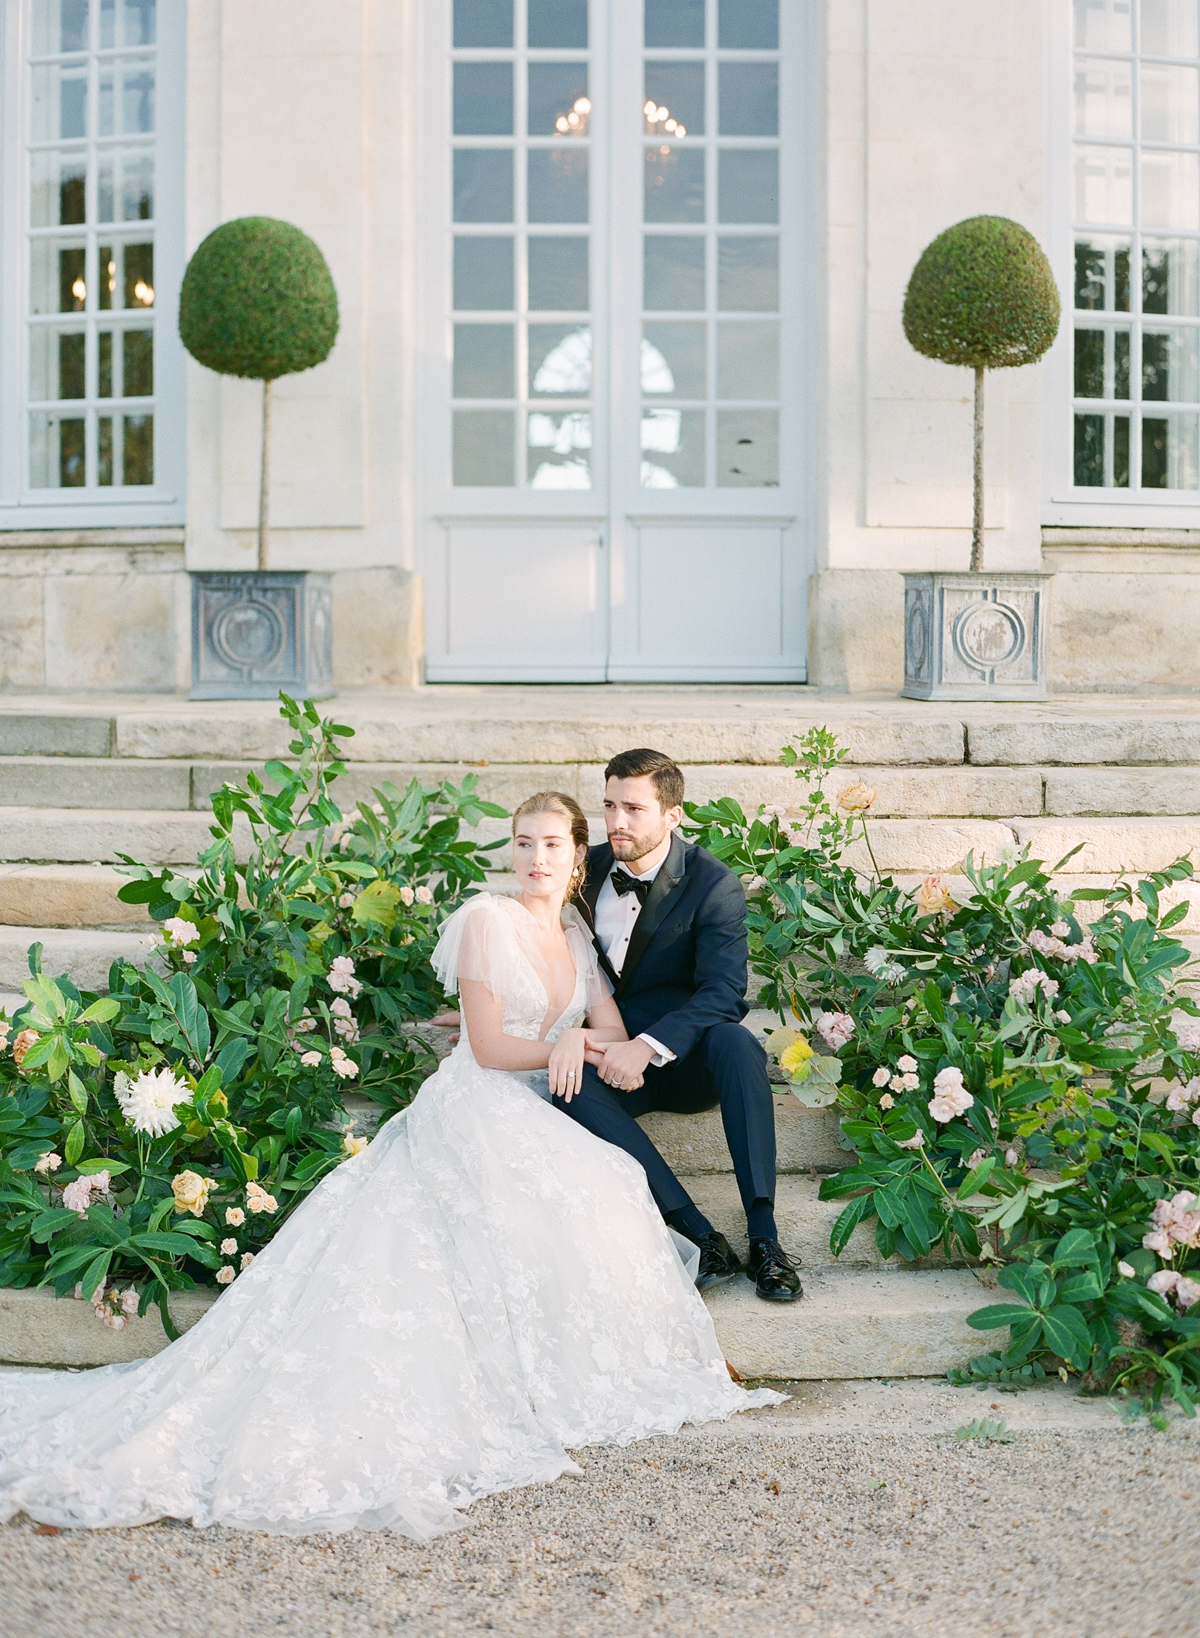 Chateau Du Grand-Luce Wedding | Seen on Style Me Pretty by Molly Carr